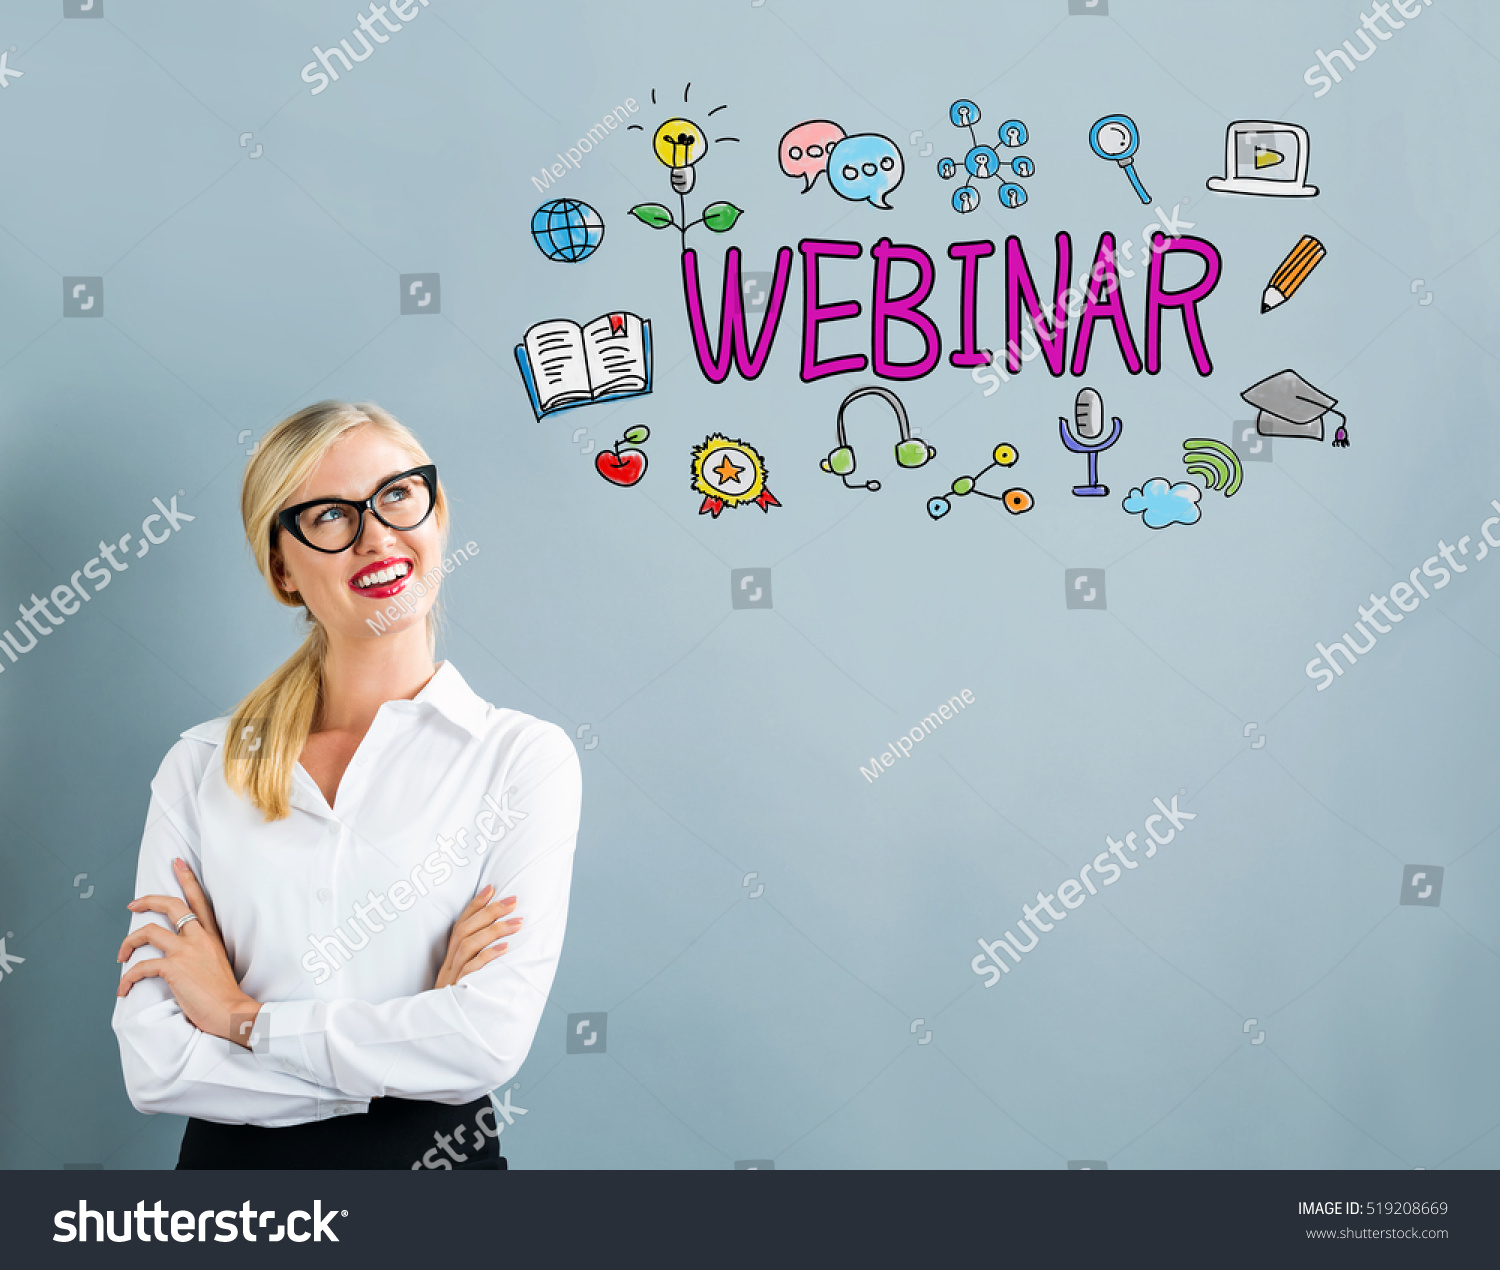 Webinar text with business woman on a gray background #519208669